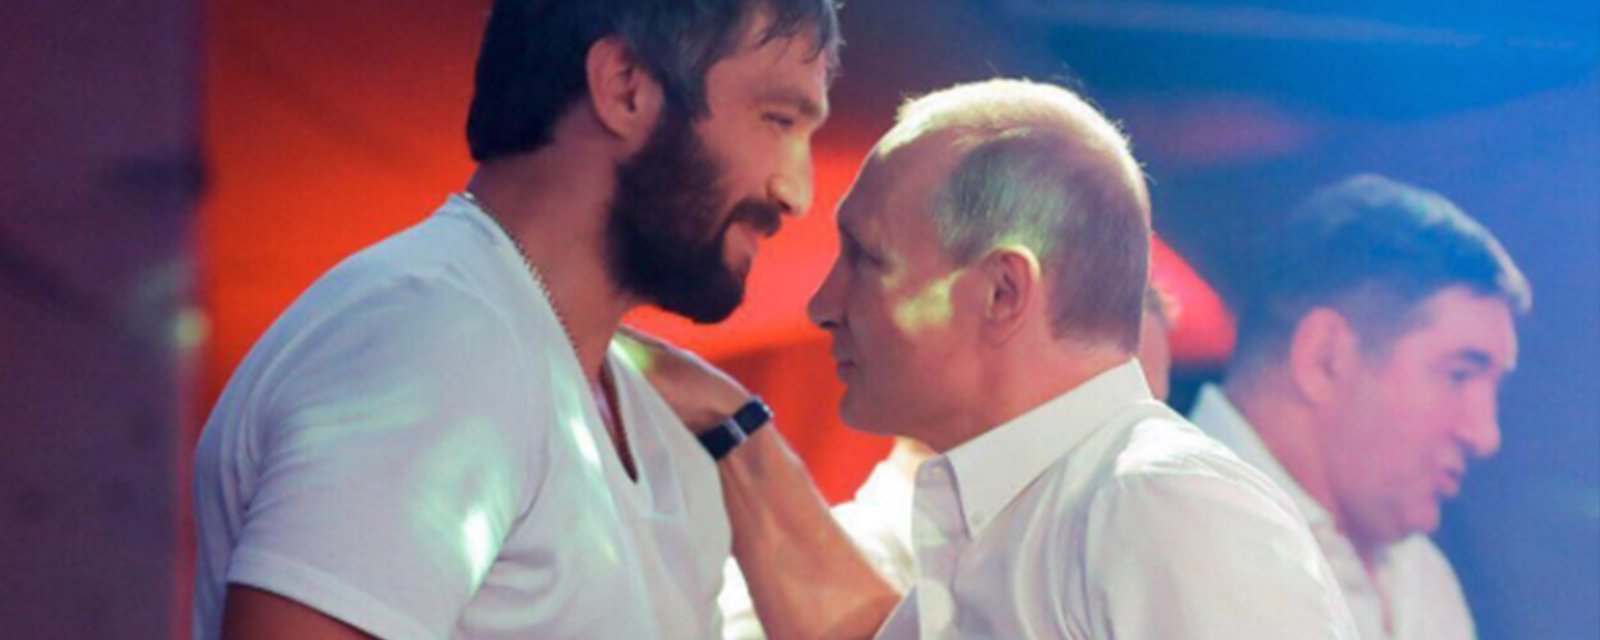 Breaking: Ovechkin pledges allegiance to Putin with bizarre social movement